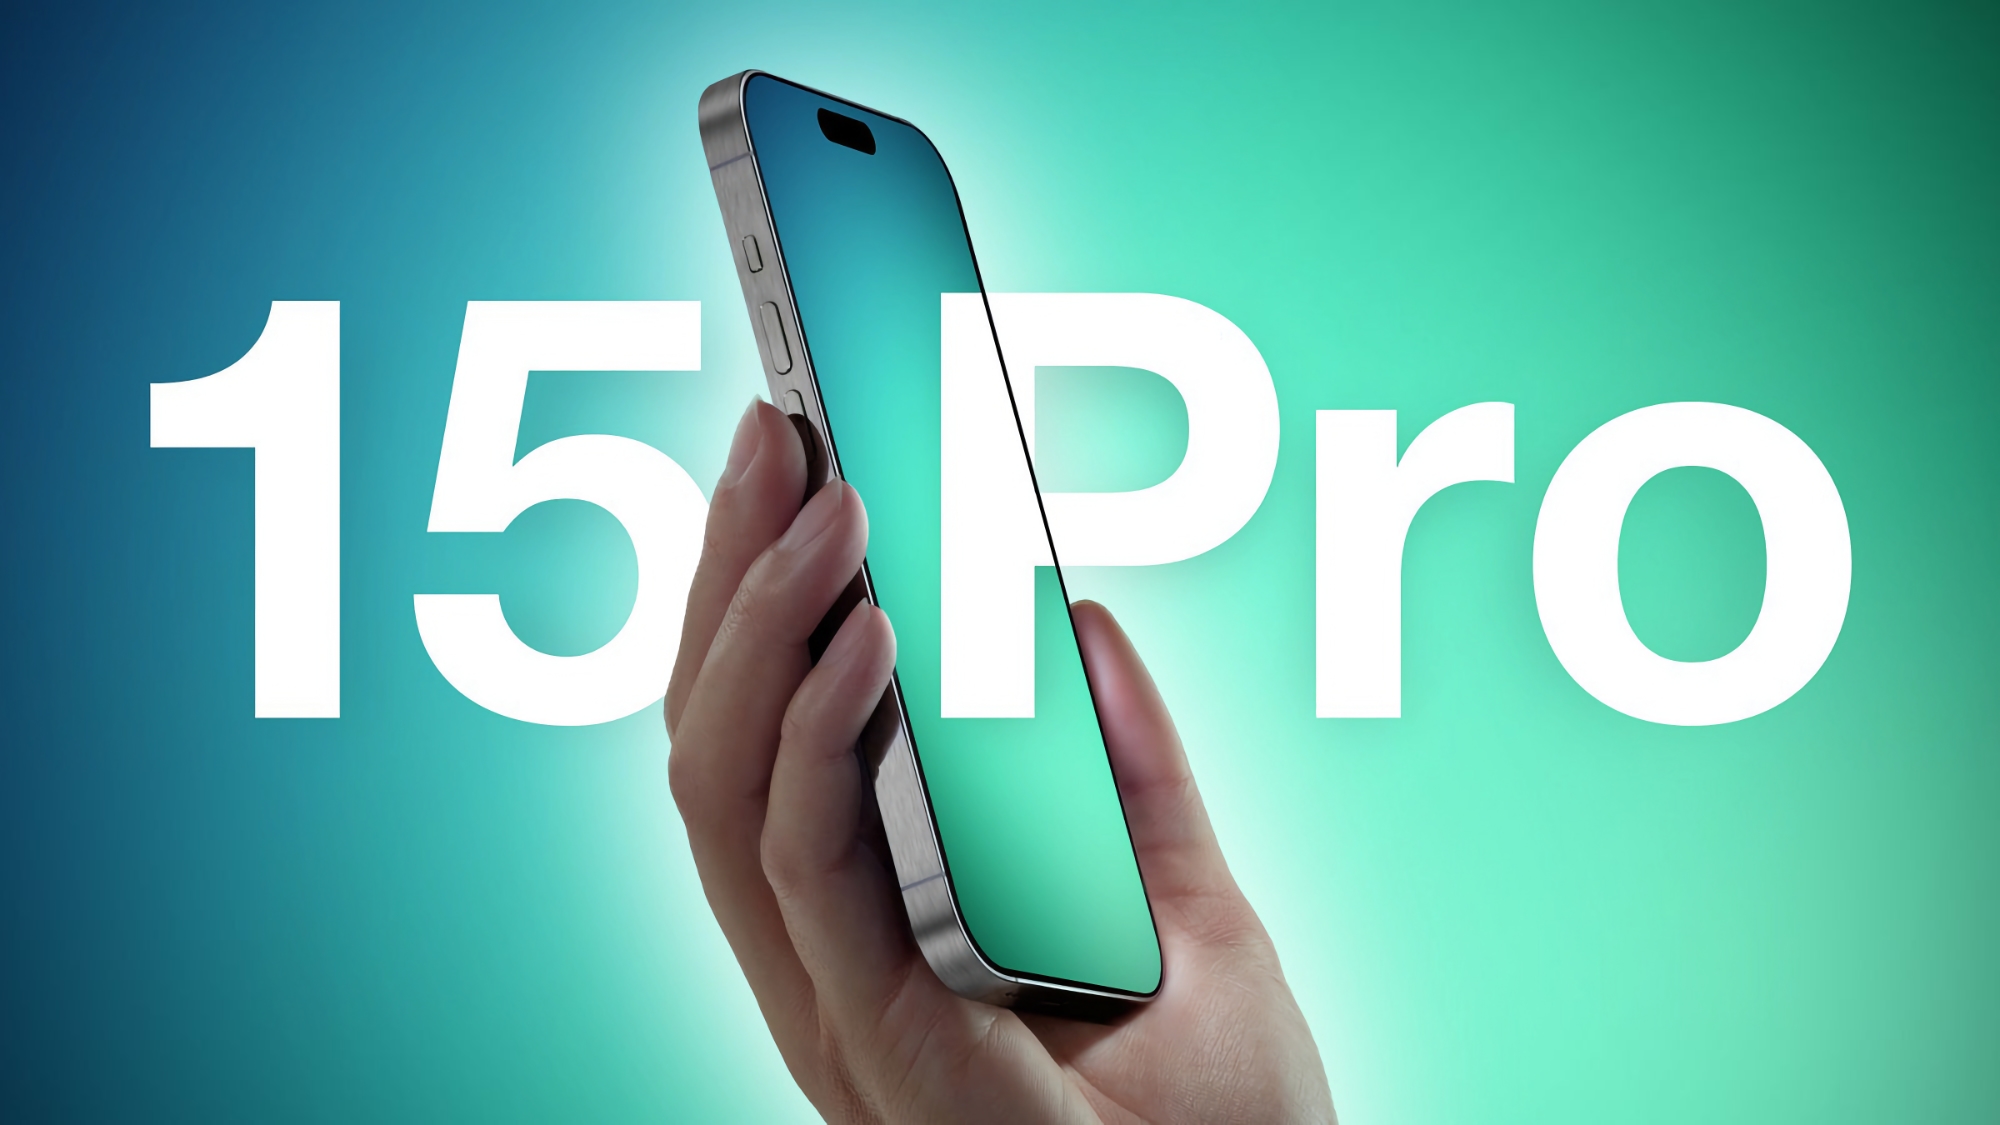 iPhone 15 Pro and iPhone 15 Pro Max will go up in price: analyst reveals prices of new iPhones